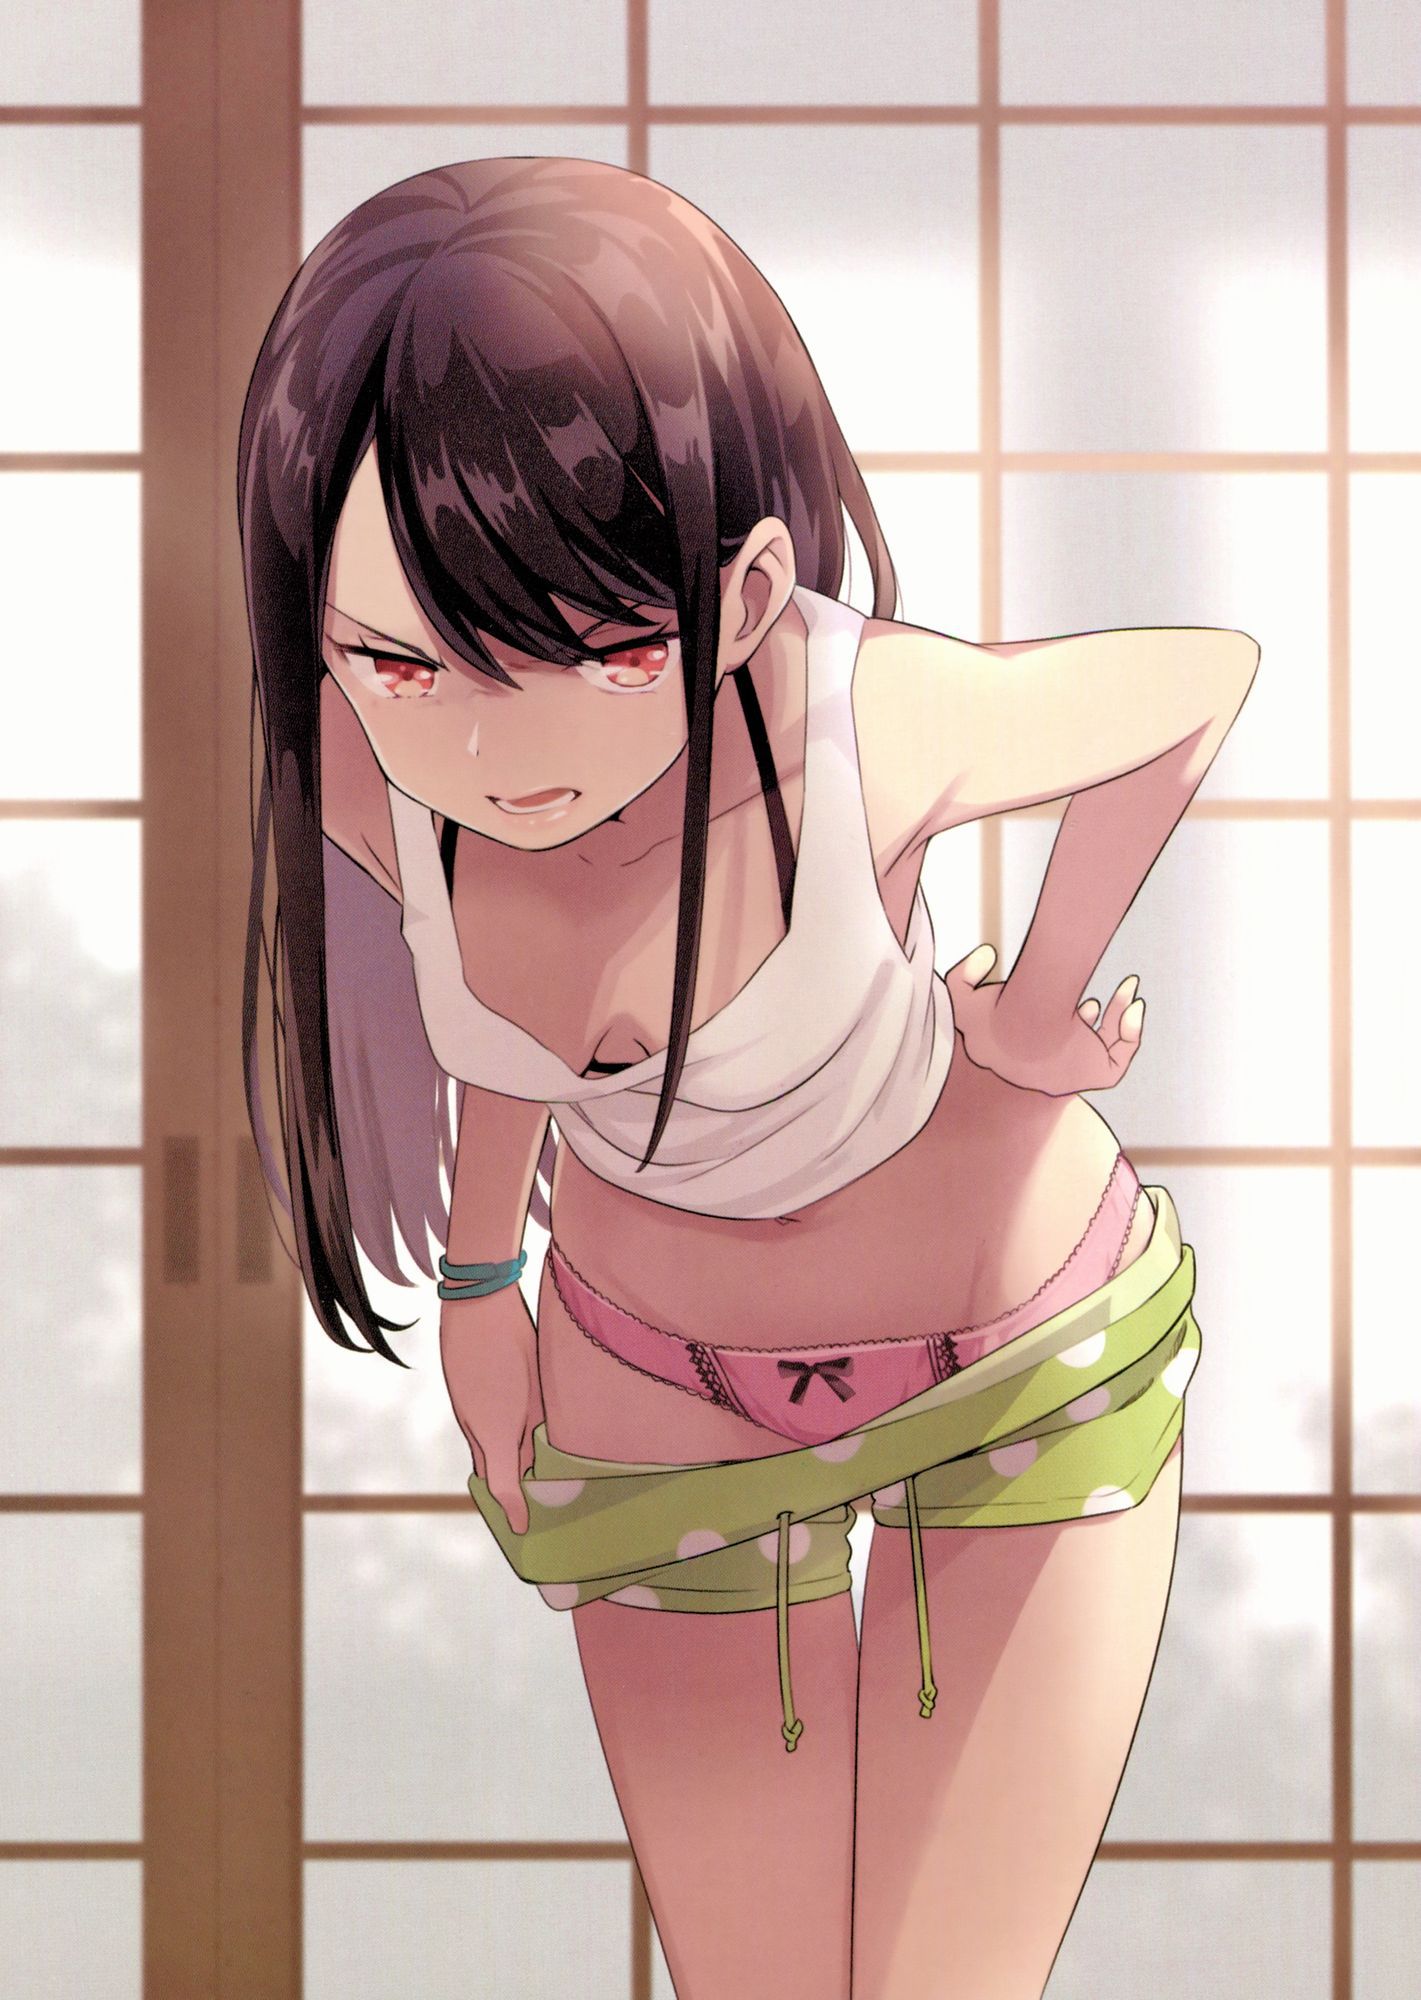 [Secondary ZIP] bra skirt image of the rainbow Girl who looks at a glimpse 45